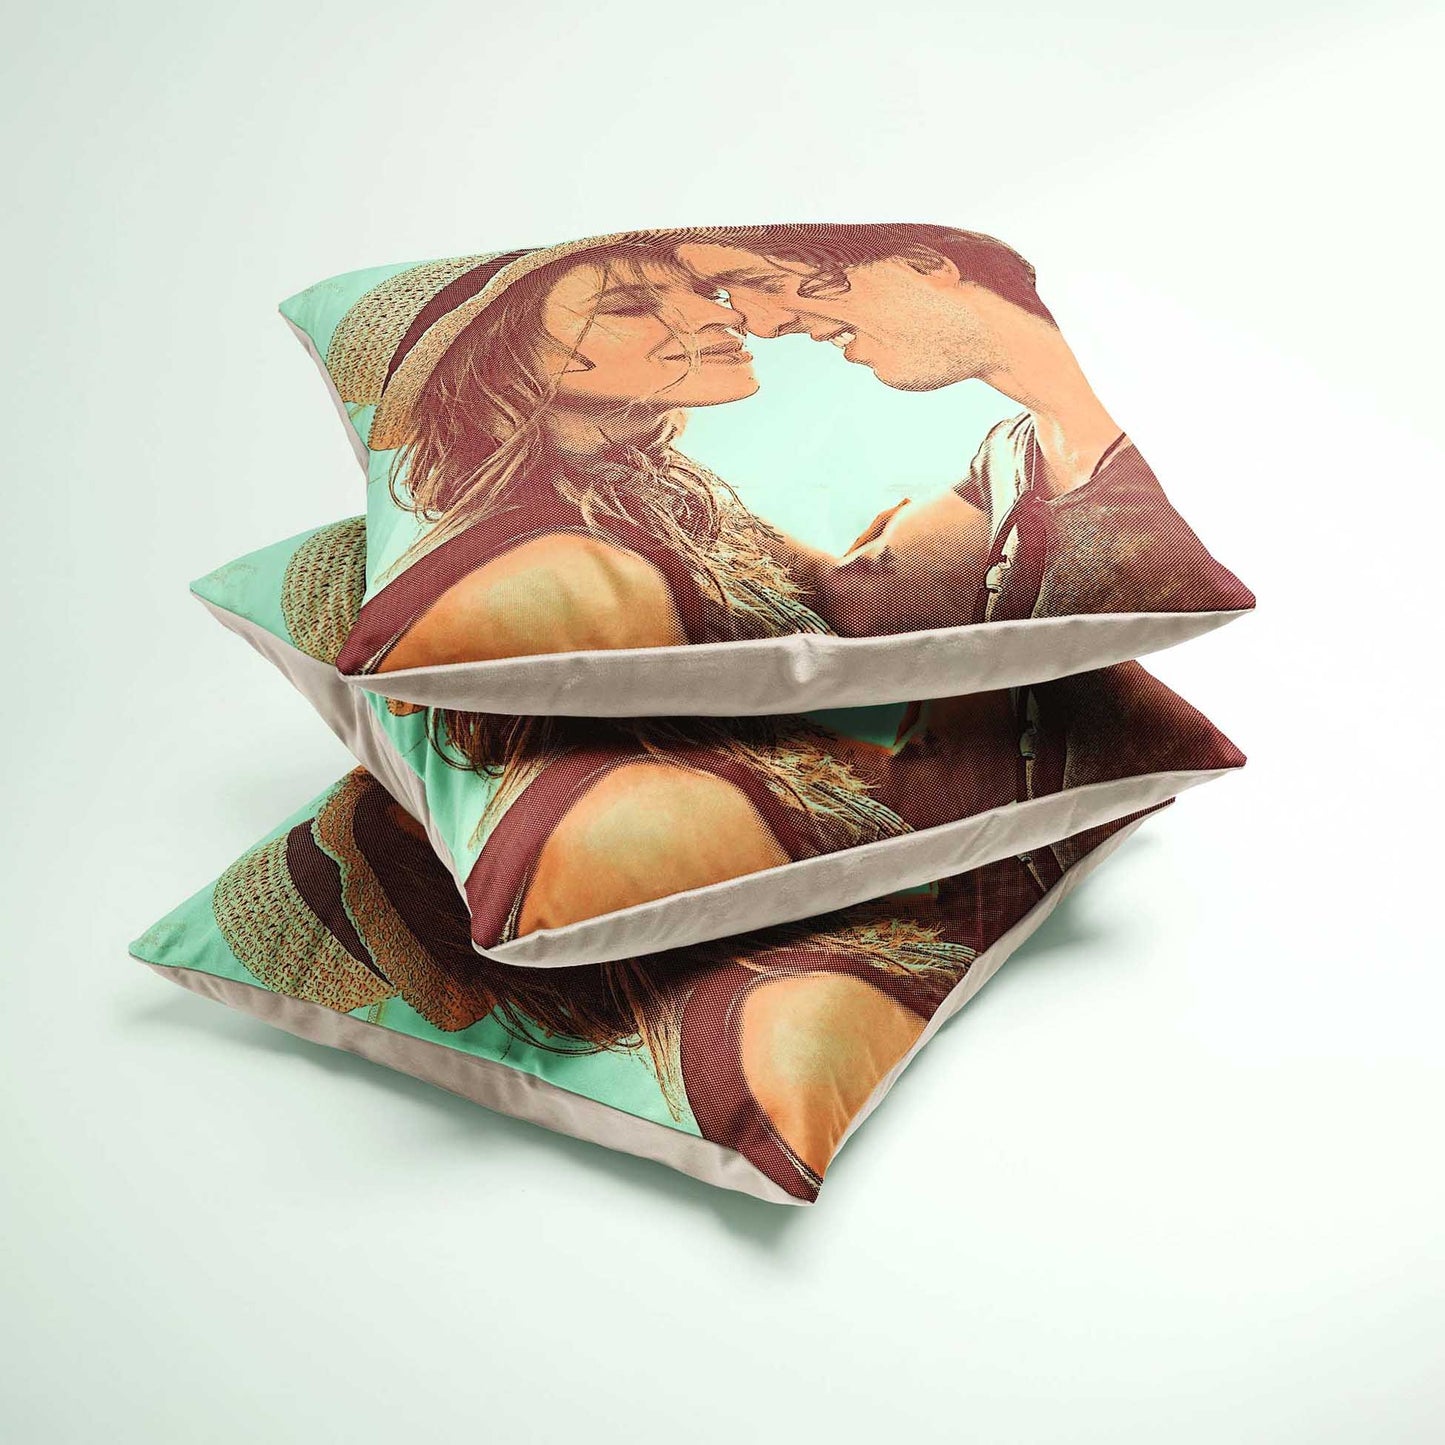 Revitalize your home with the Personalised Orange and Green Cushion, a modern and stylish addition to your interior. This unique cushion features a custom digital art print, inspired by your chosen photo, which adds a fresh and trendy touch